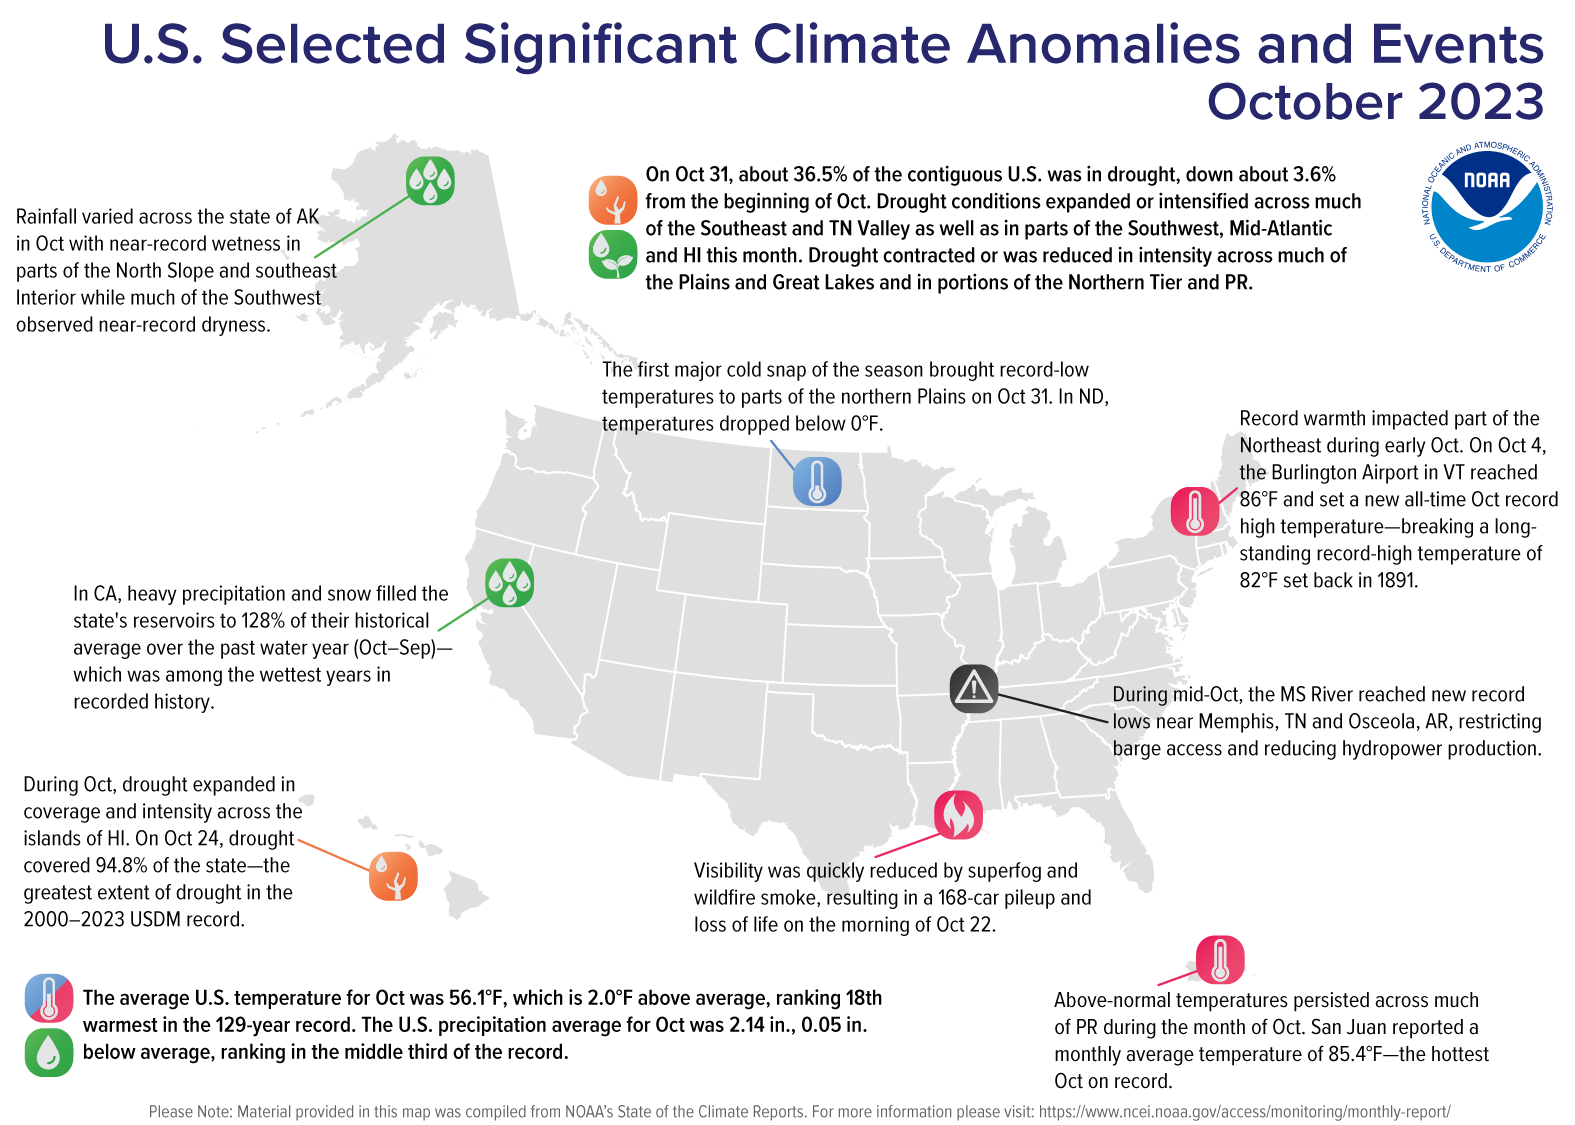 A map of the U.S. plotted with significant climate events that occurred during October 2023. Please see the story below as well as more details in the report summary from NOAA NCEI at  http://bit.ly/USClimate202310.